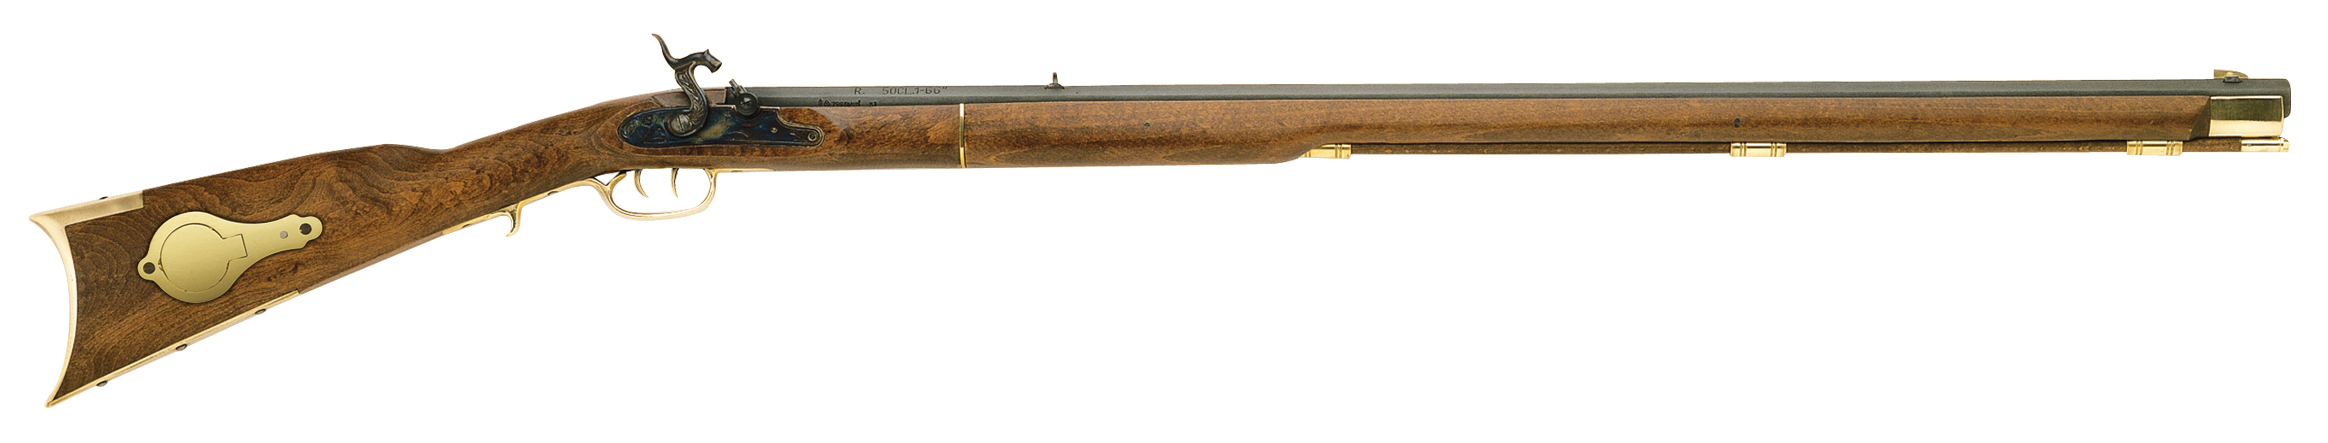 Deluxe Kentucky Rifle .50 cal Percussion Select Hardwood/Blued R2040-02